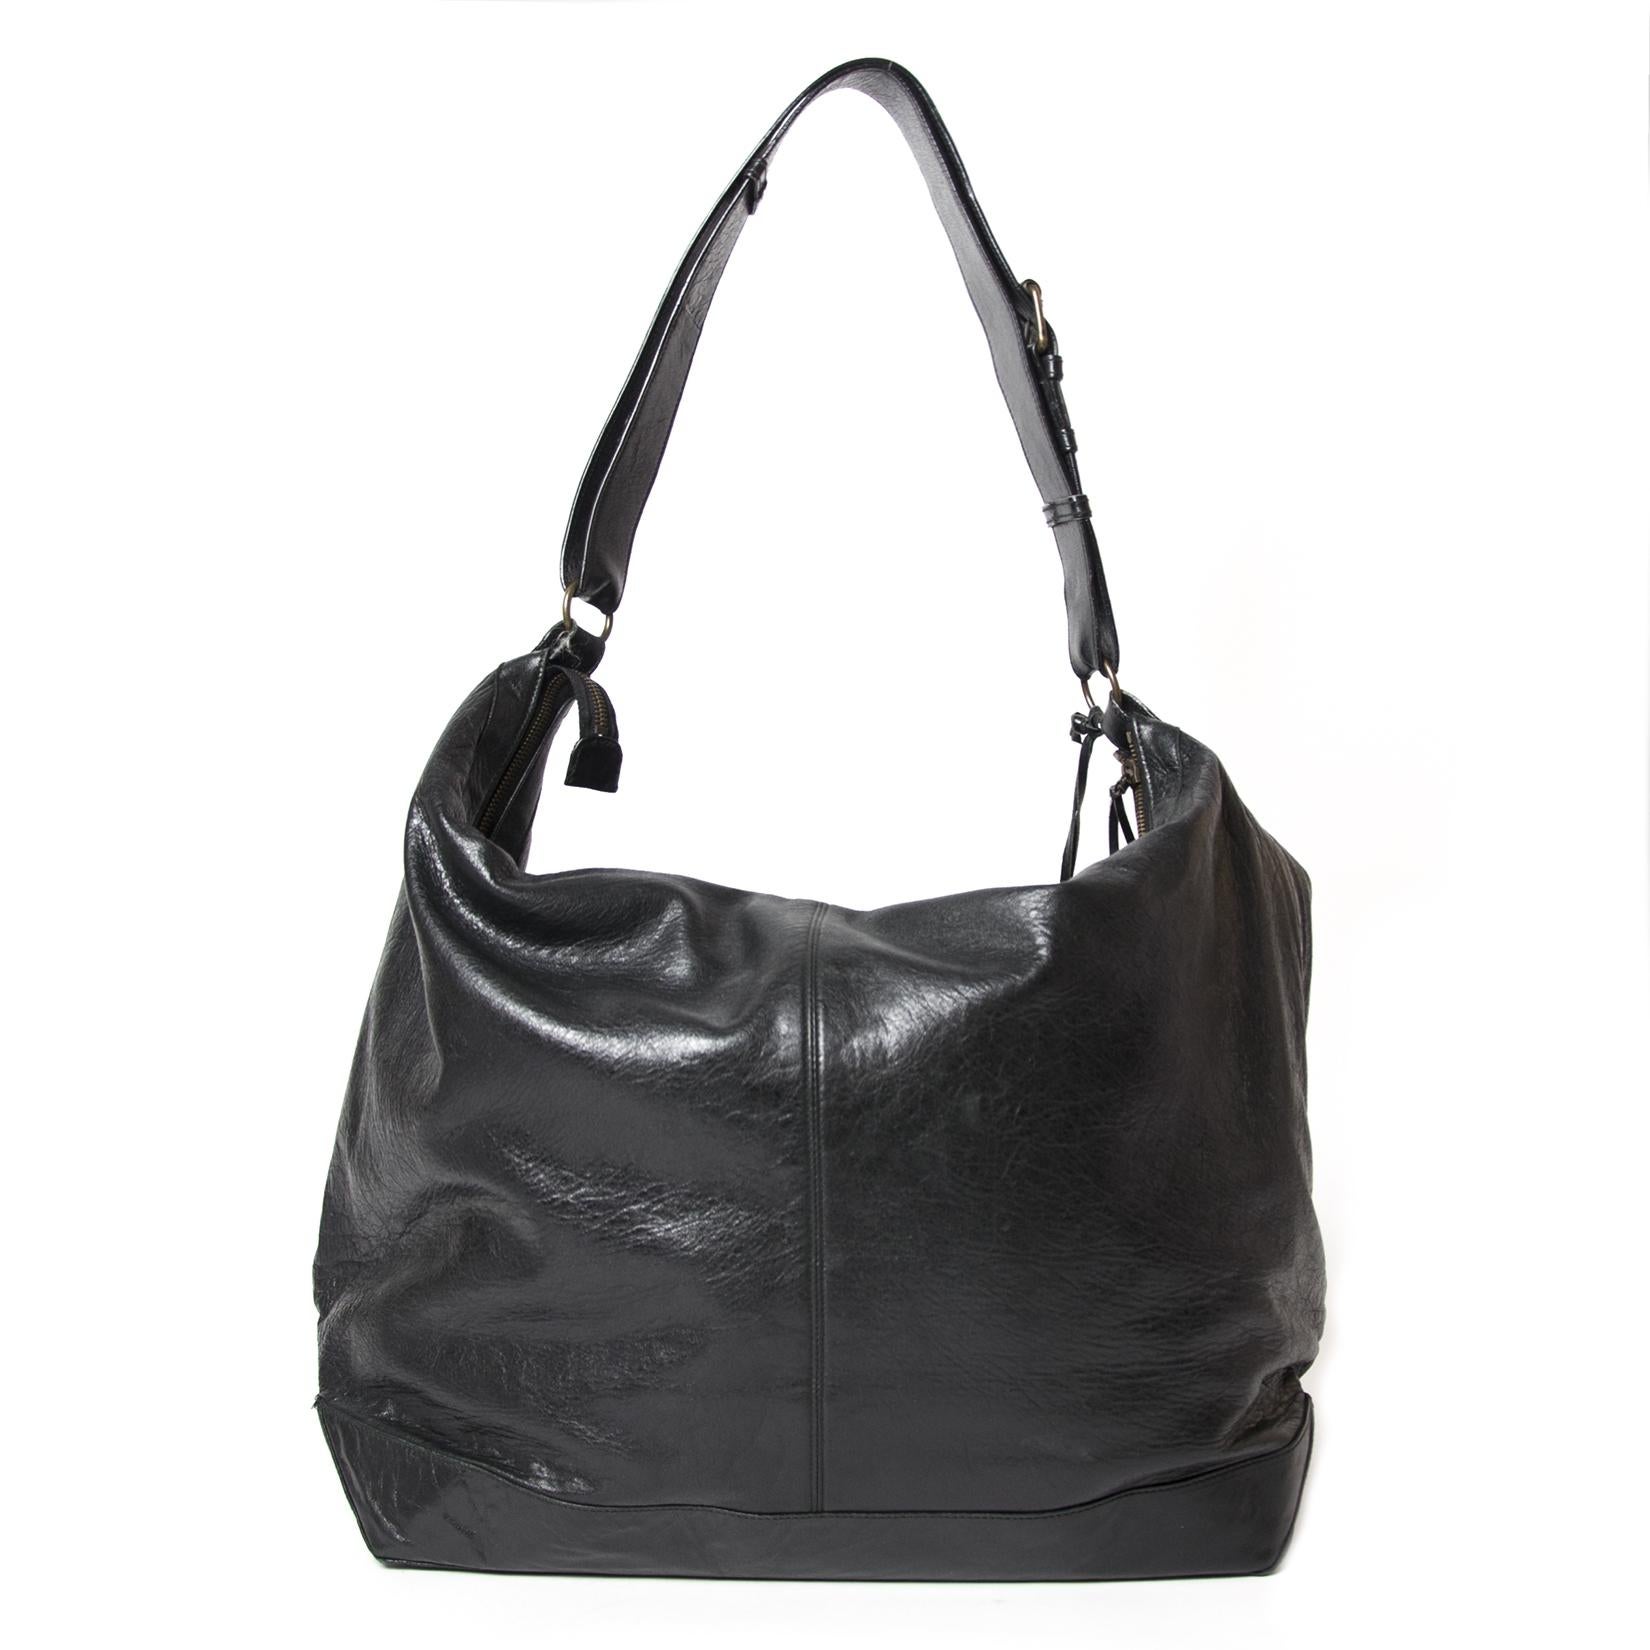 Good condition

Balenciaga Black Courier Bag
Balenciaga's black Courier bag is constructed of the house's black signature wrinkled lambskin.
It features a zip pocket and metal studs at front. The bag has silvertone hardware and a fabric lined